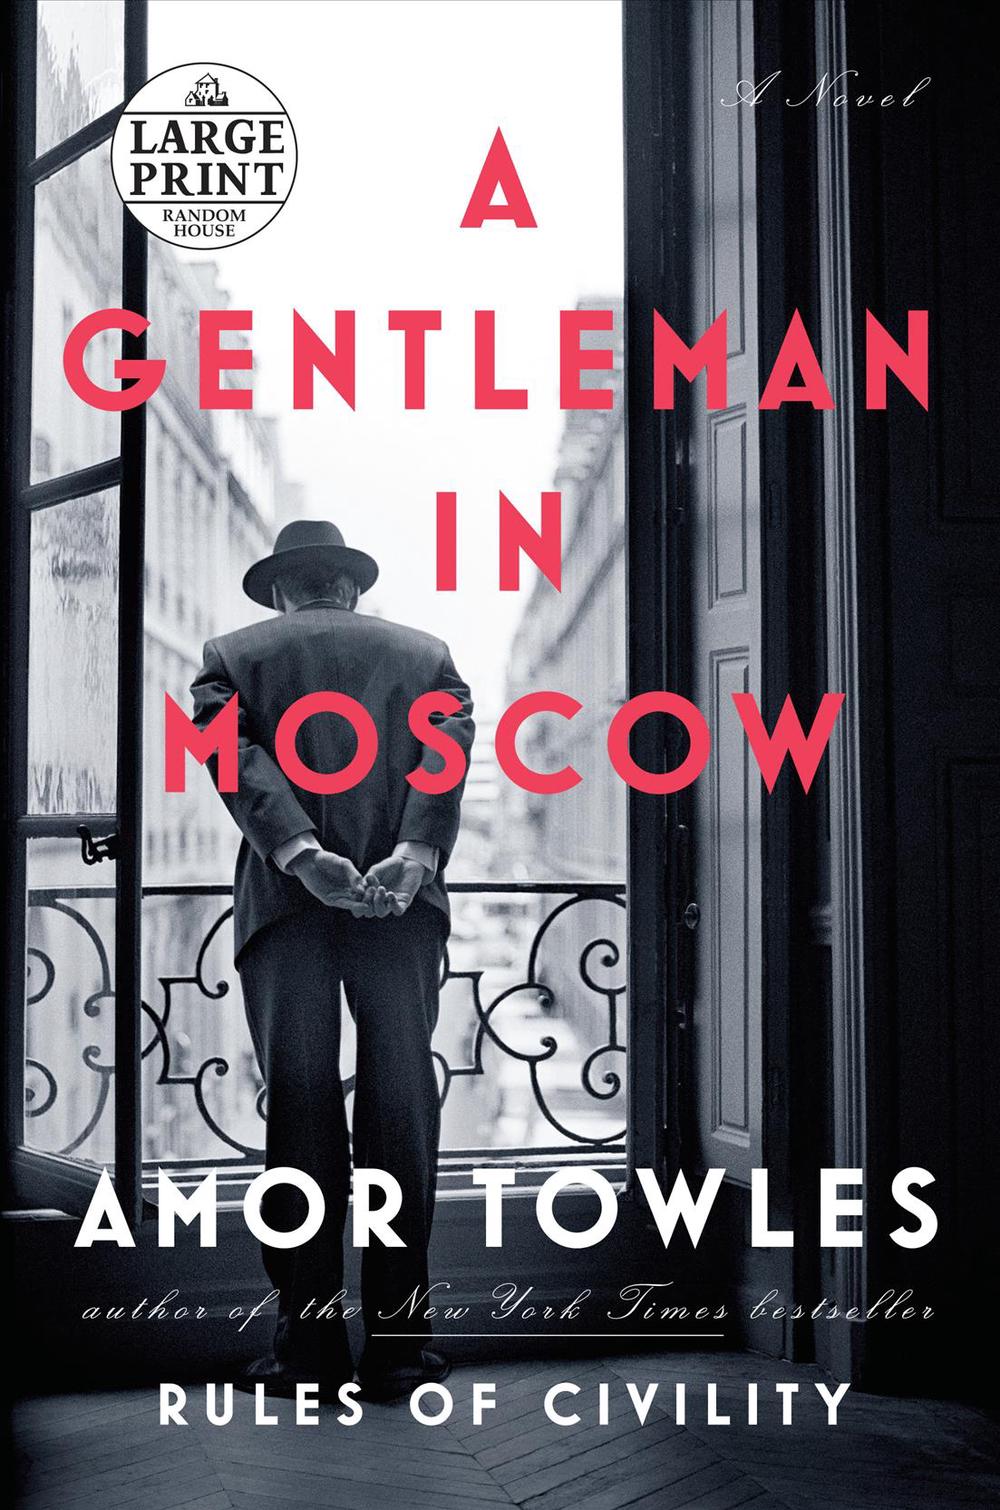 a gentleman in moscow about